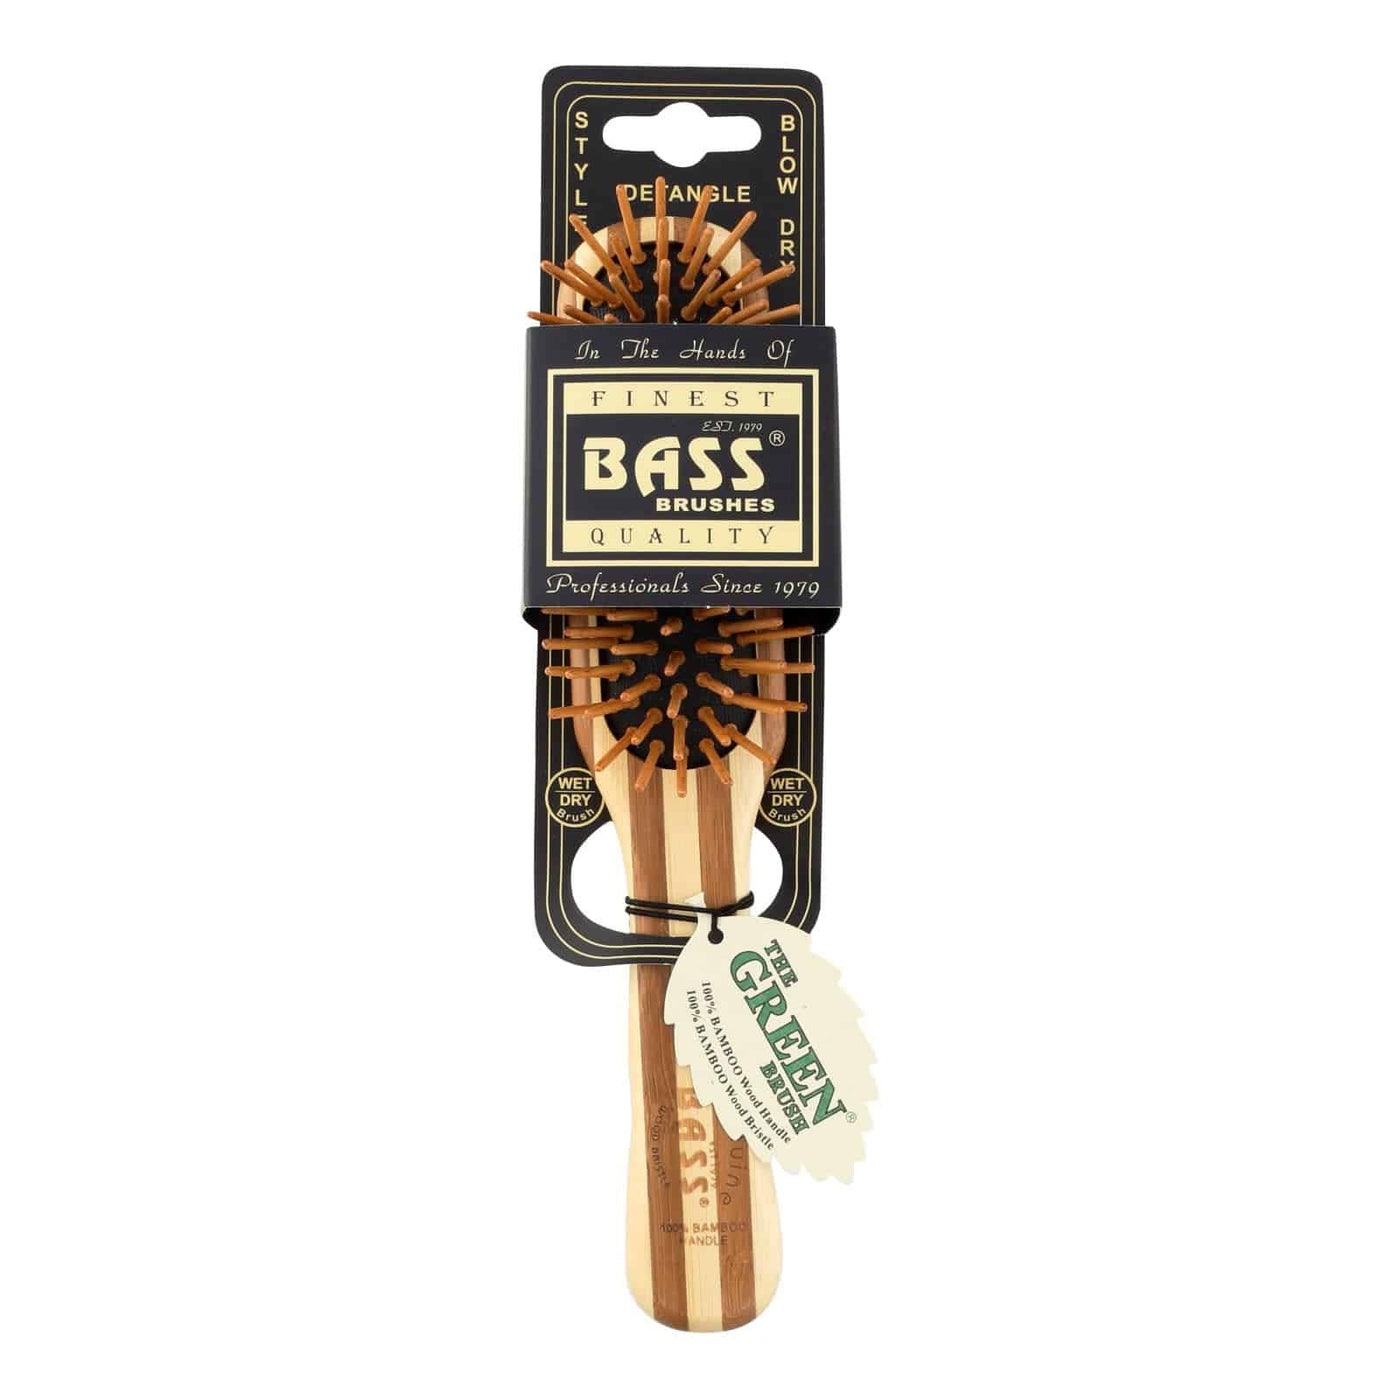 Bass Brushes - Natural Bamboo Pin Brush - Small - 1 Count | OnlyNaturals.us